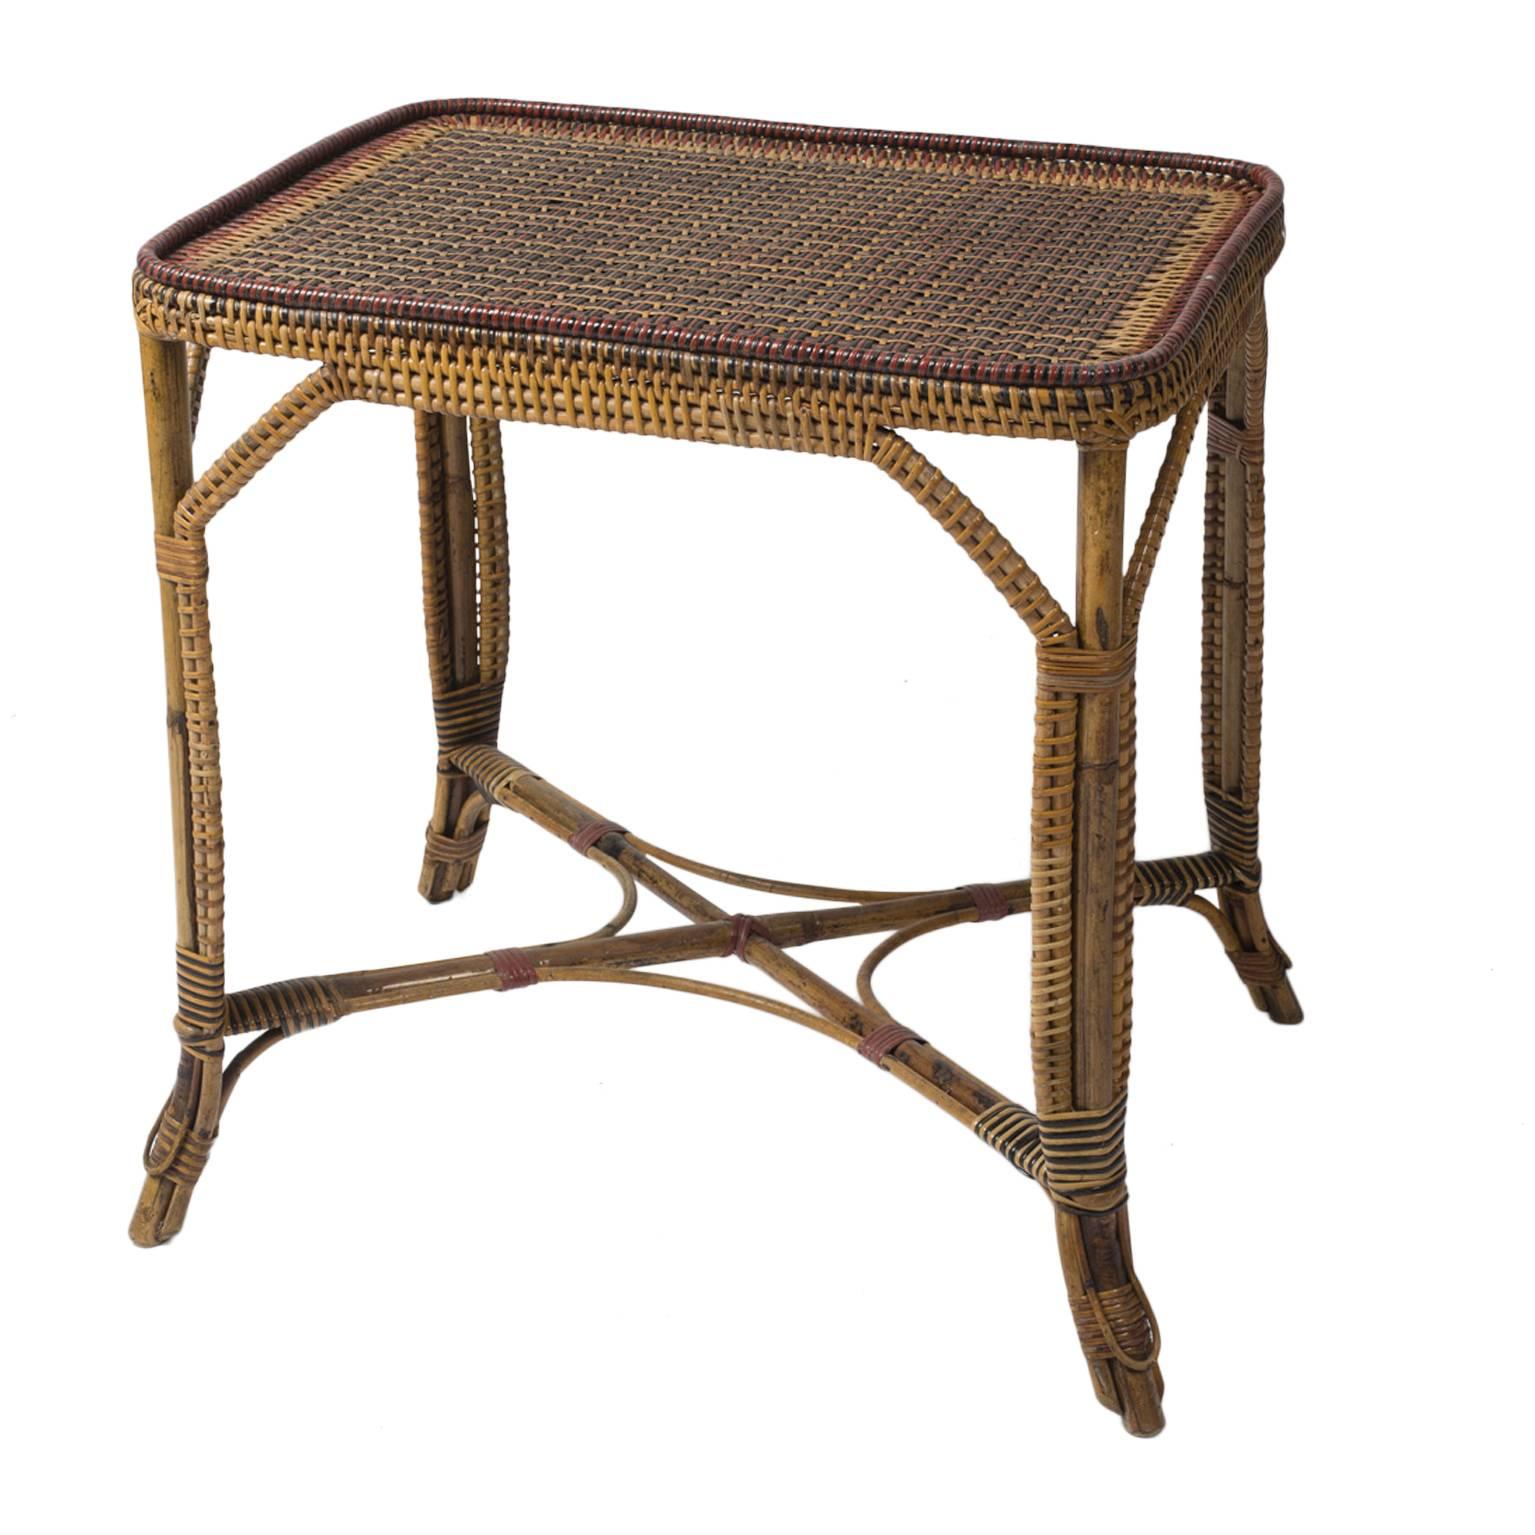 Nice Side Table in Braided Rattan, France, 1900